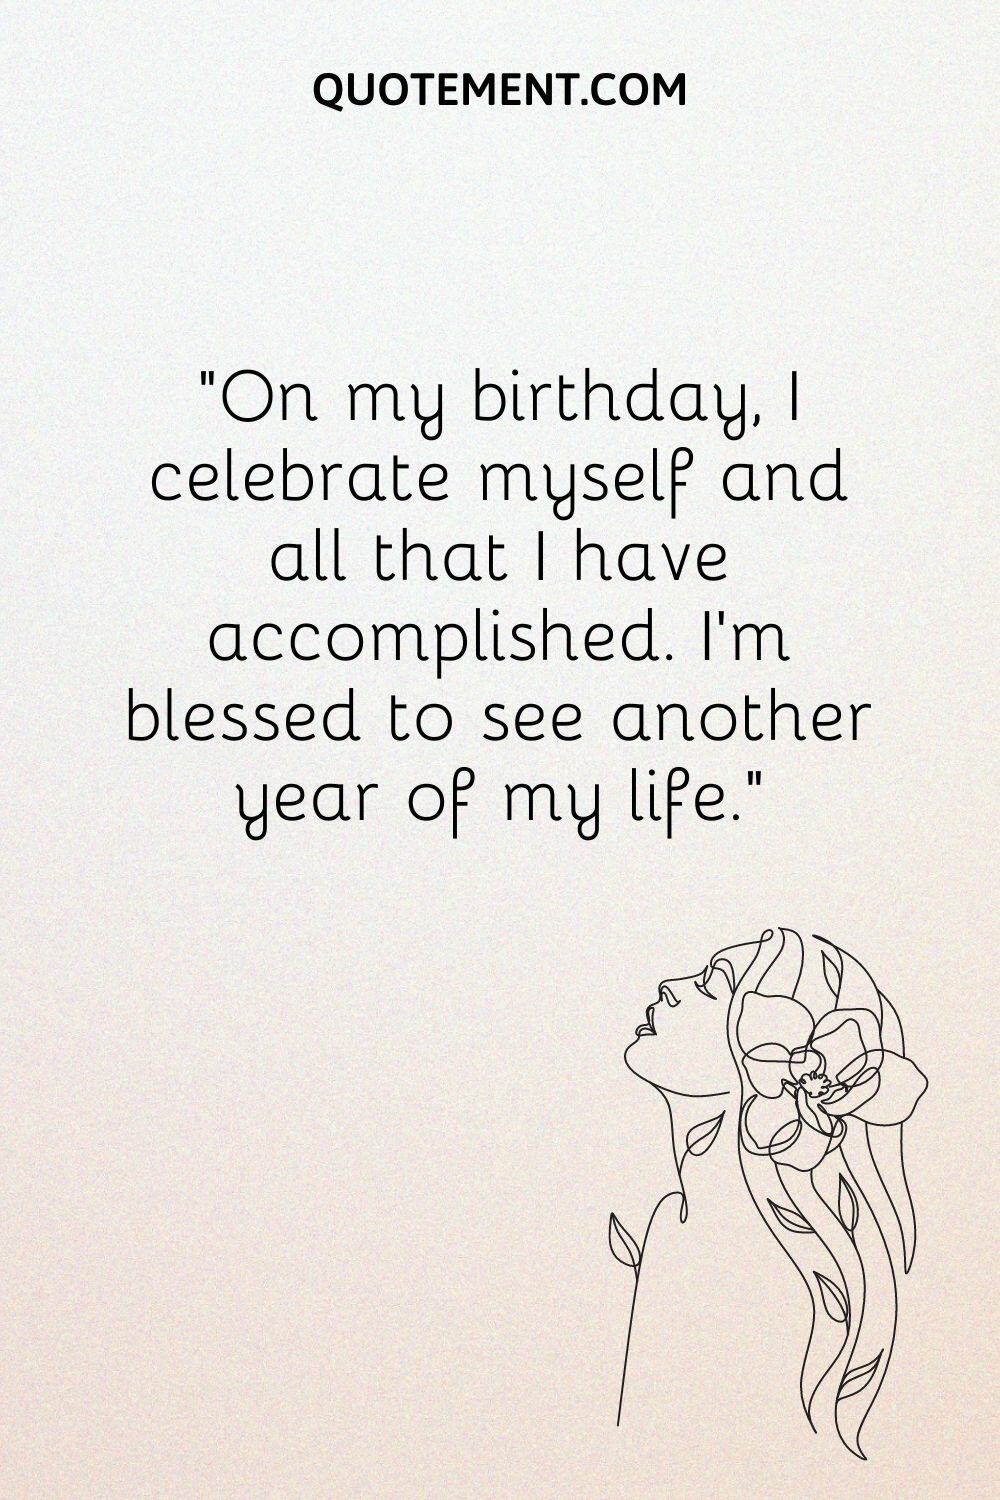 On my birthday, I celebrate myself and all that I have accomplished.